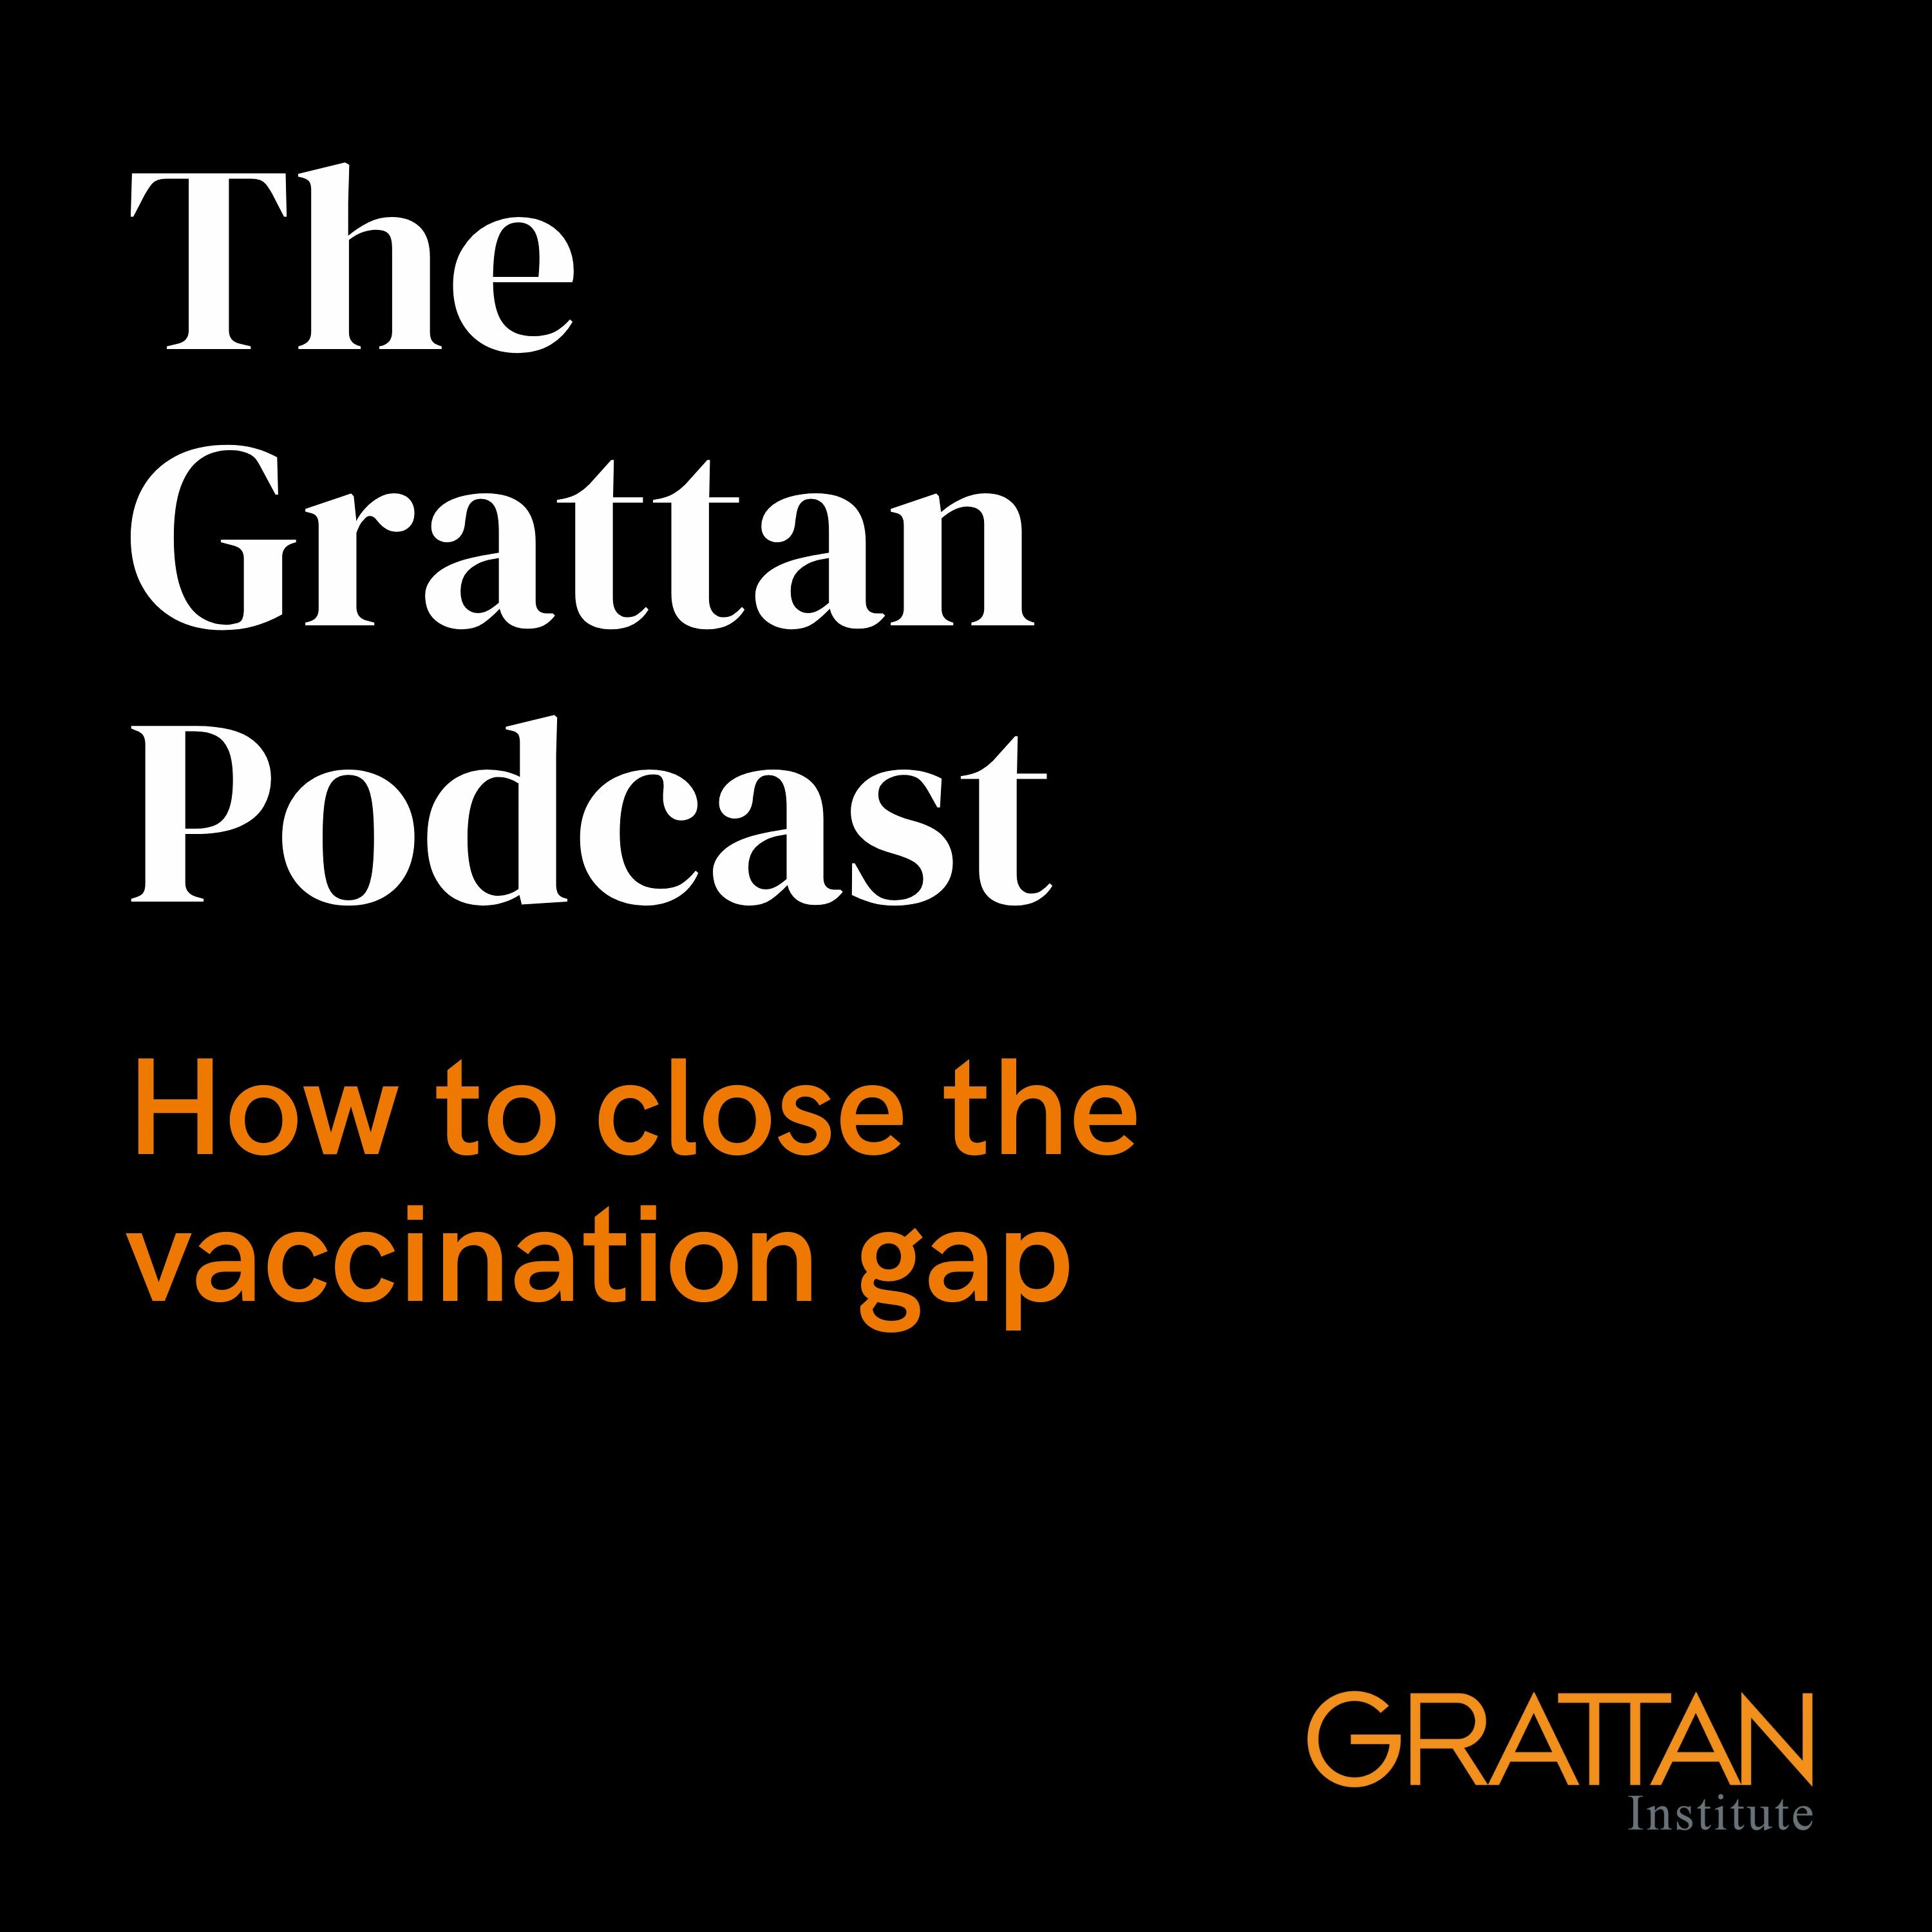 How to close the vaccination gap